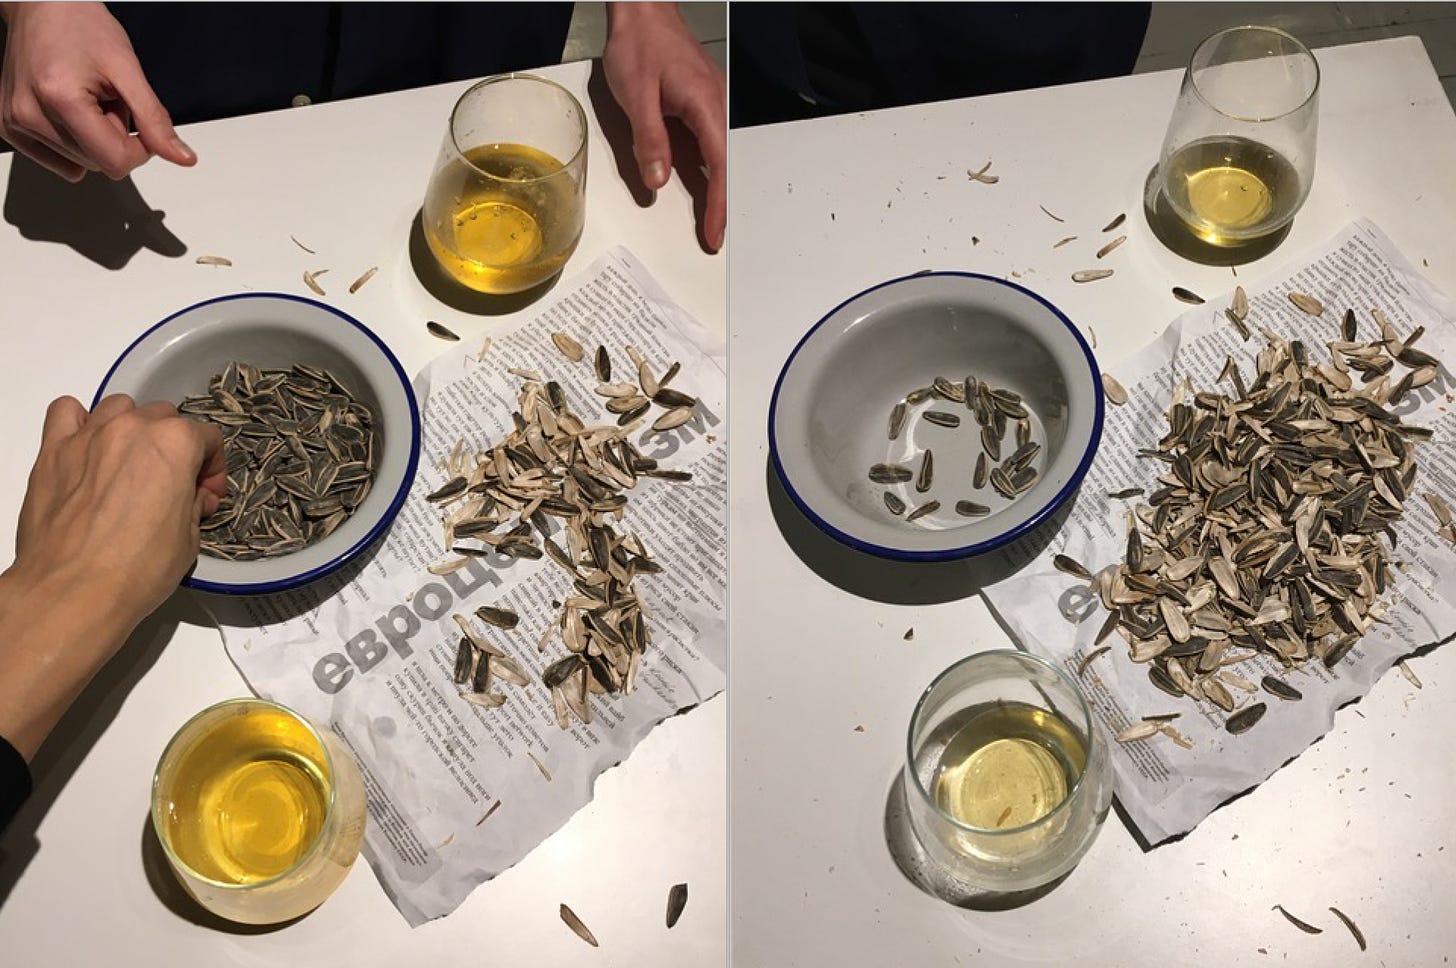 A photo of a table from above. A dish of sunflower seeds is picked at by two people's hands. Their husks are scattered across the table and on a piece of paper. Two glasses have a bright yellow liquid in them.   Then, to the right, the same scene, with fewer whole seeds and more husks. The drinks have gone down and you can't see anyone's hands. 